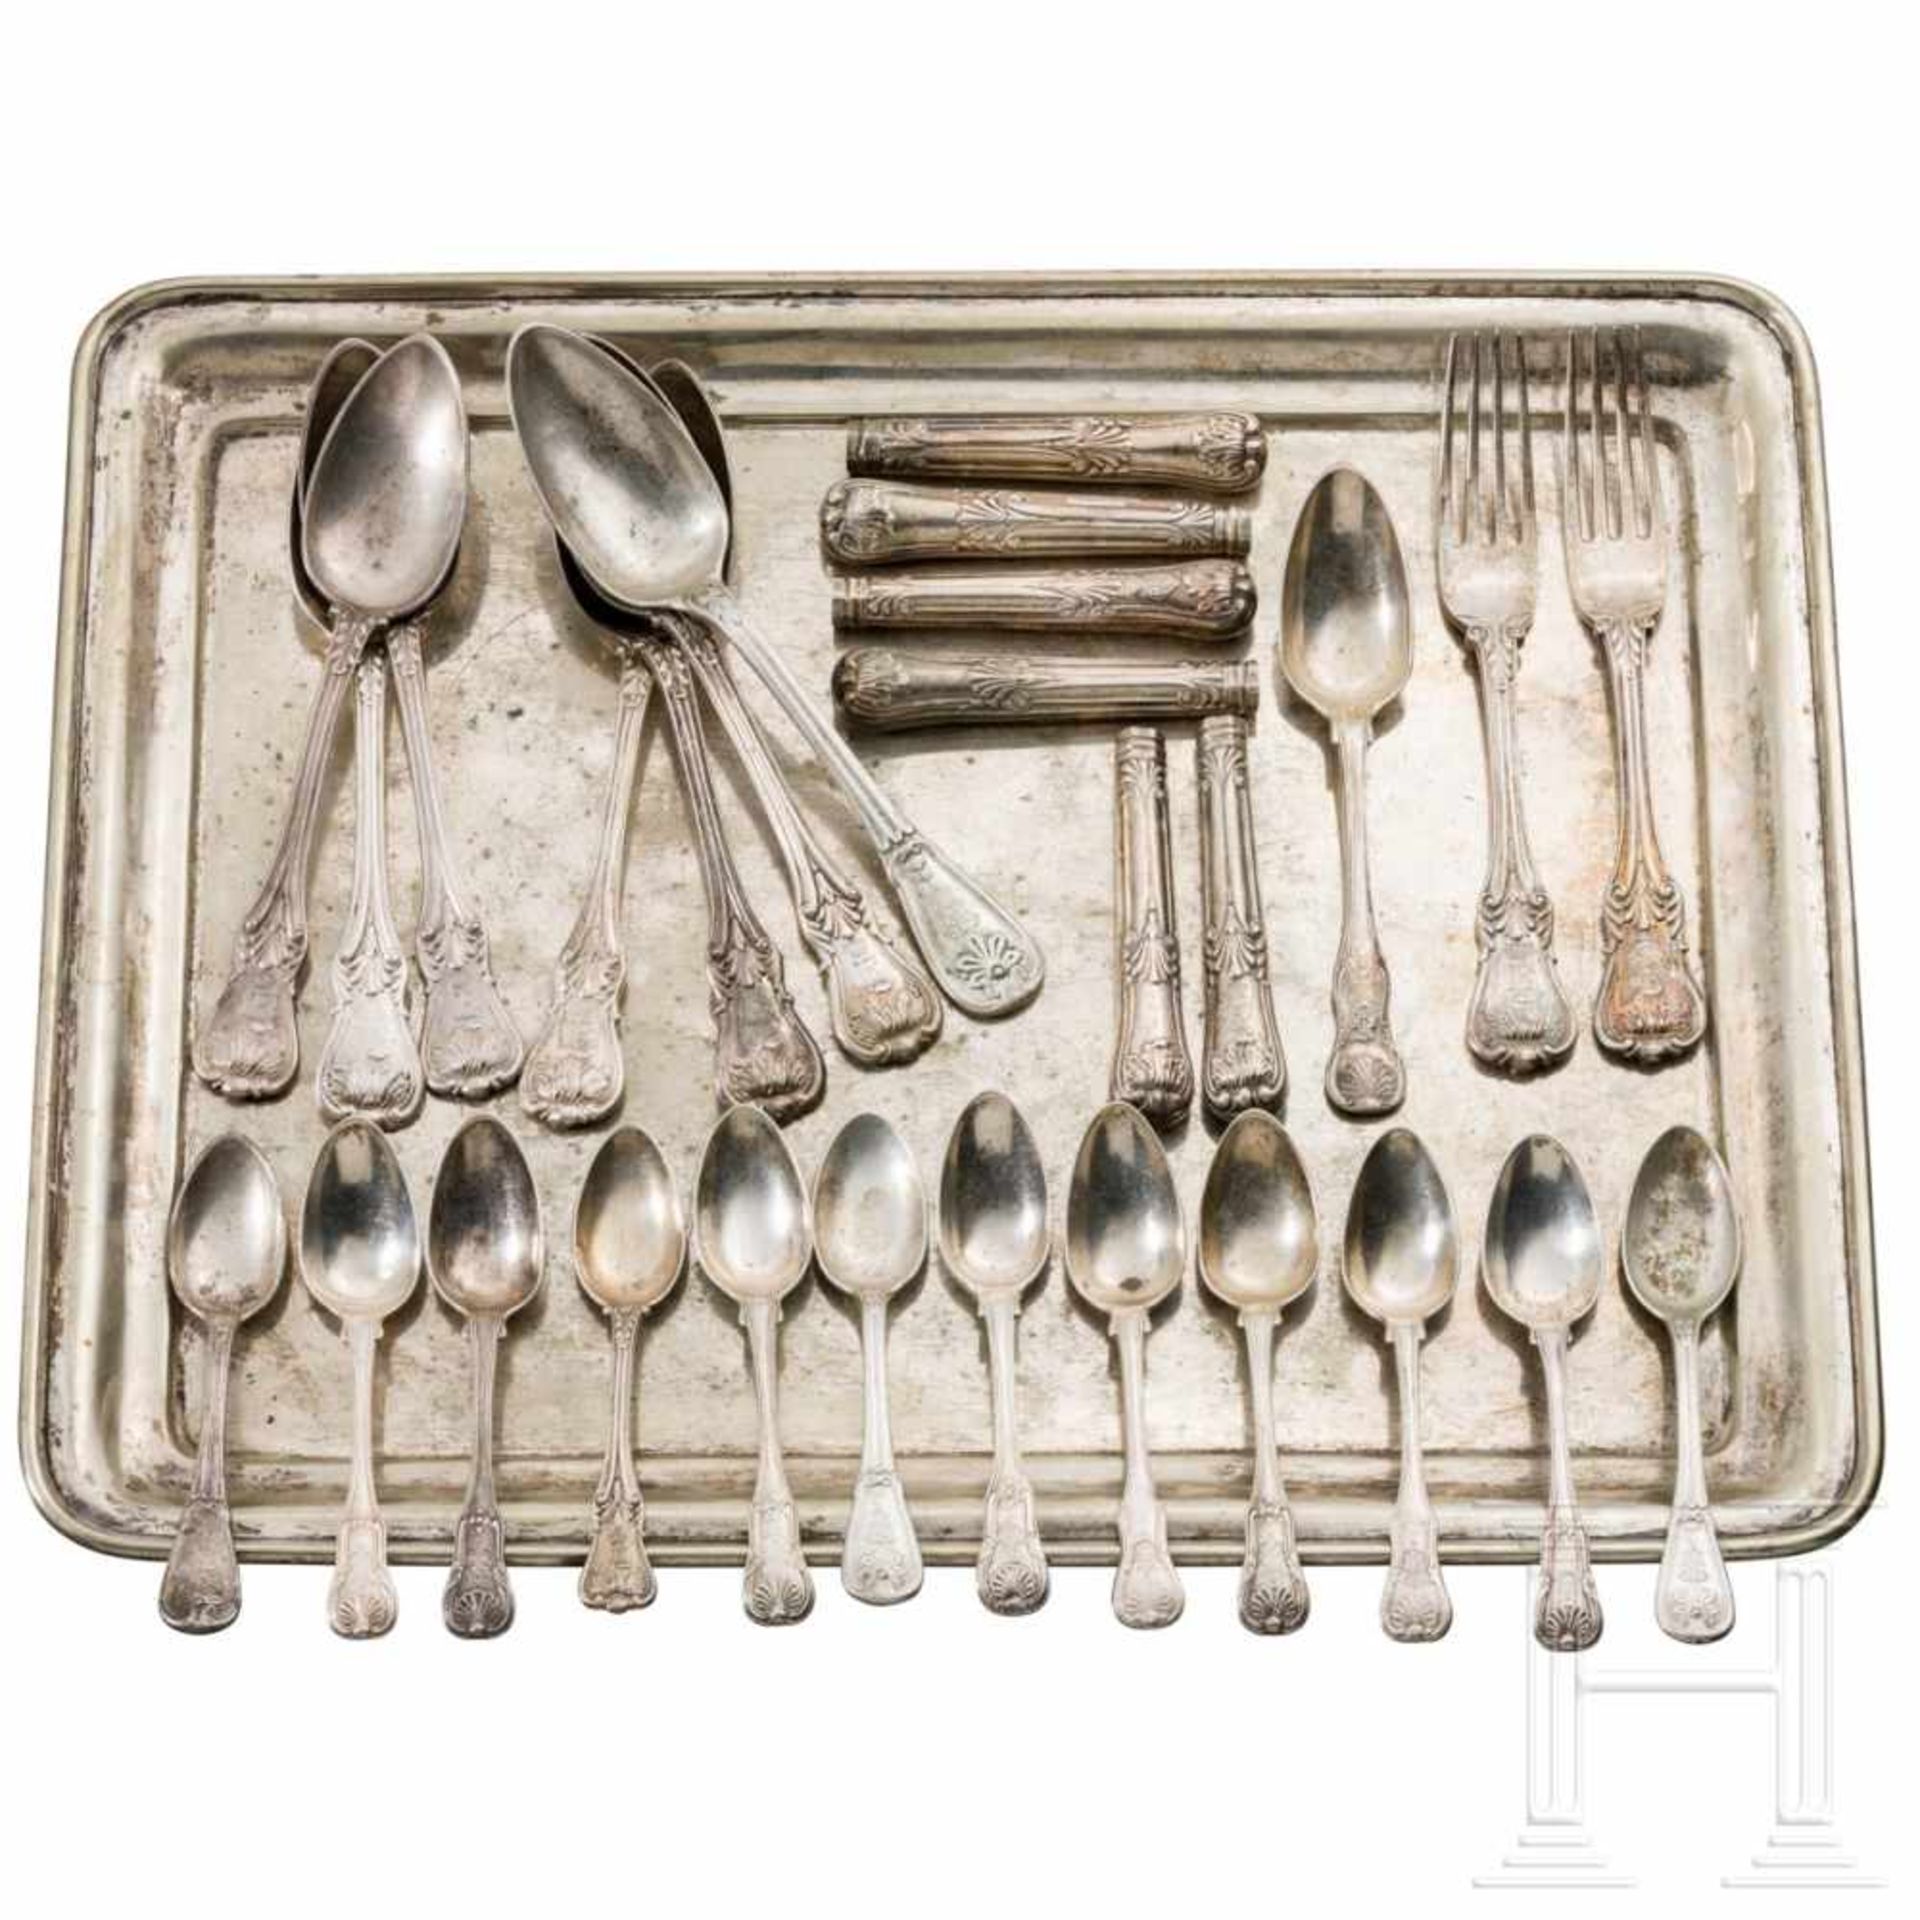 Prince Friedrich Leopold of Prussia (1865 - 1931) - 22 pieces of cutlery from his silverware and a